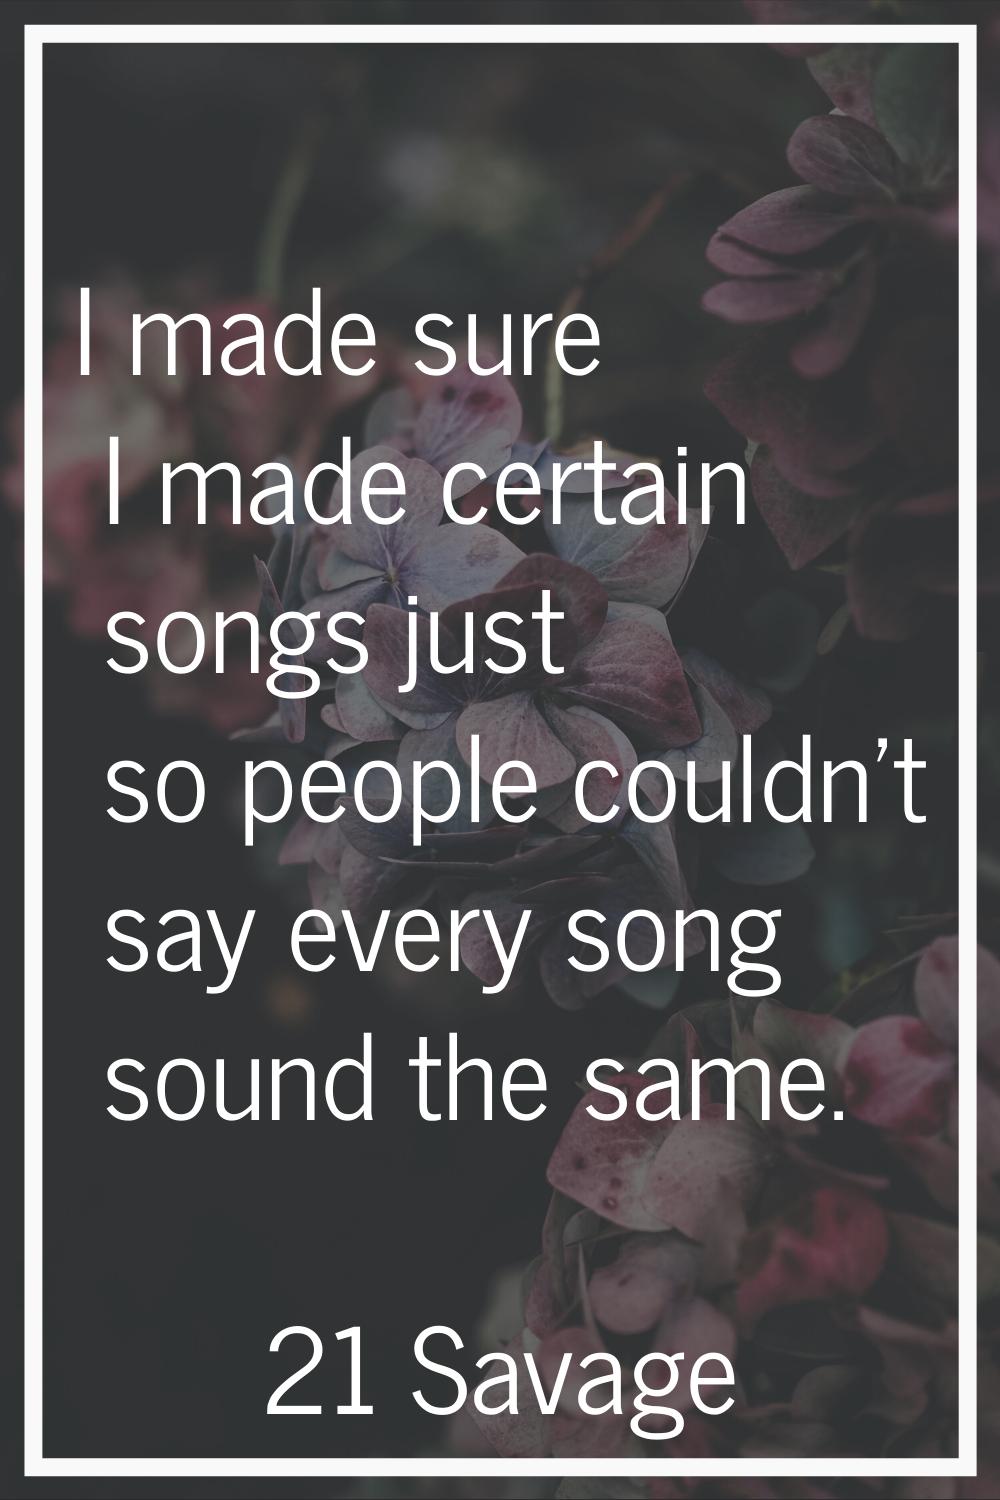 I made sure I made certain songs just so people couldn't say every song sound the same.